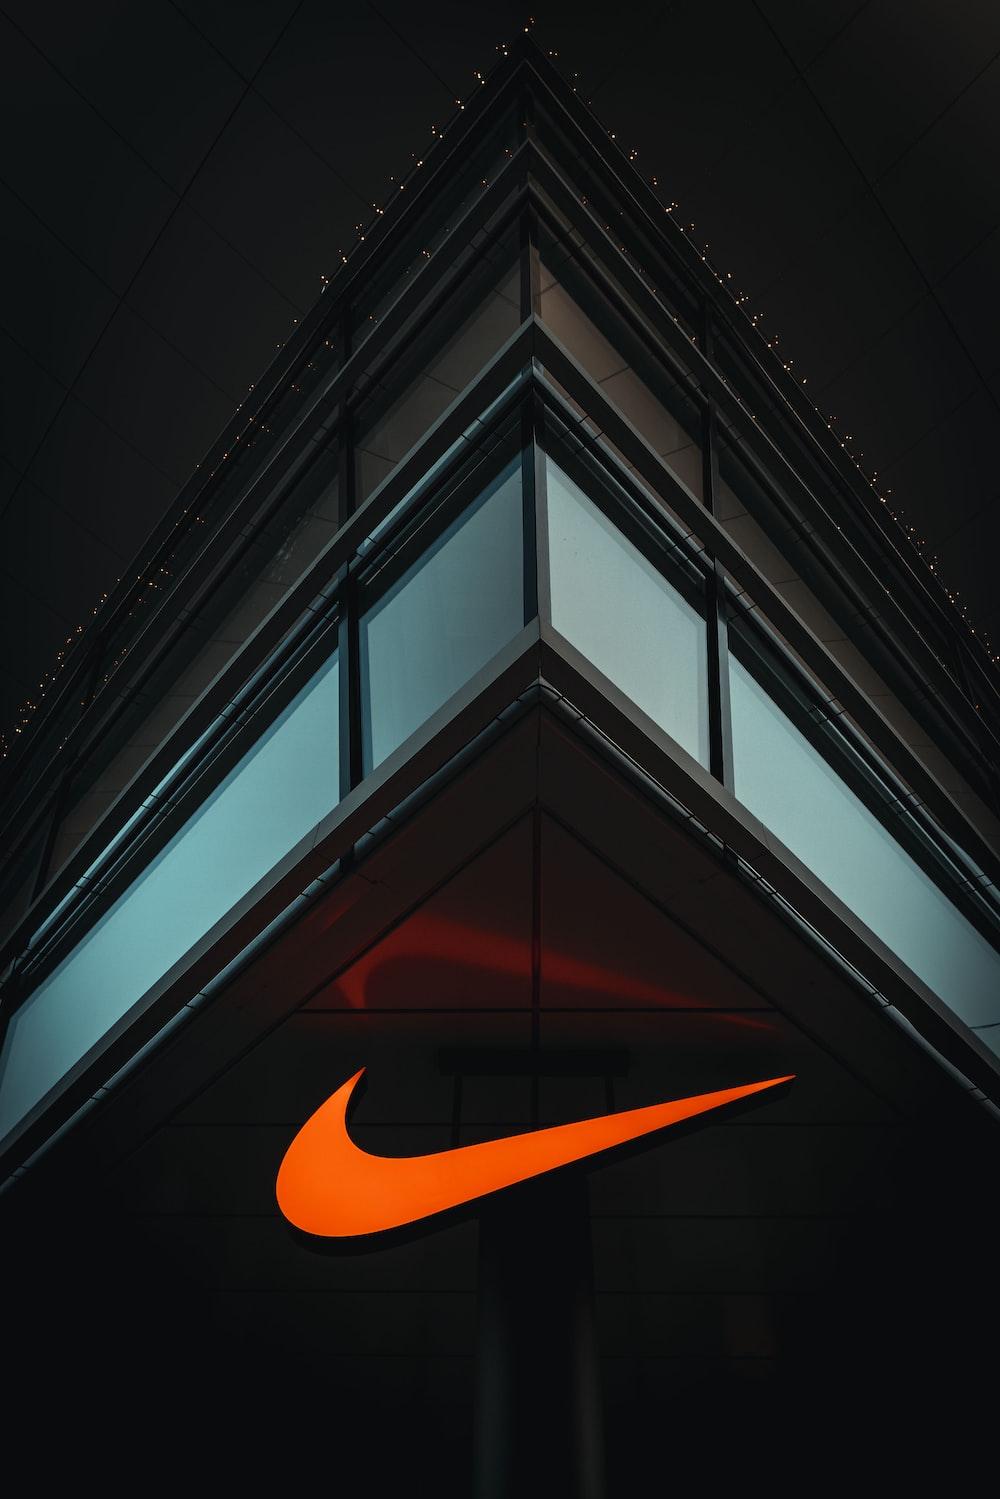 The Nike Logo Is Lit Up On Side Of A Building Photo